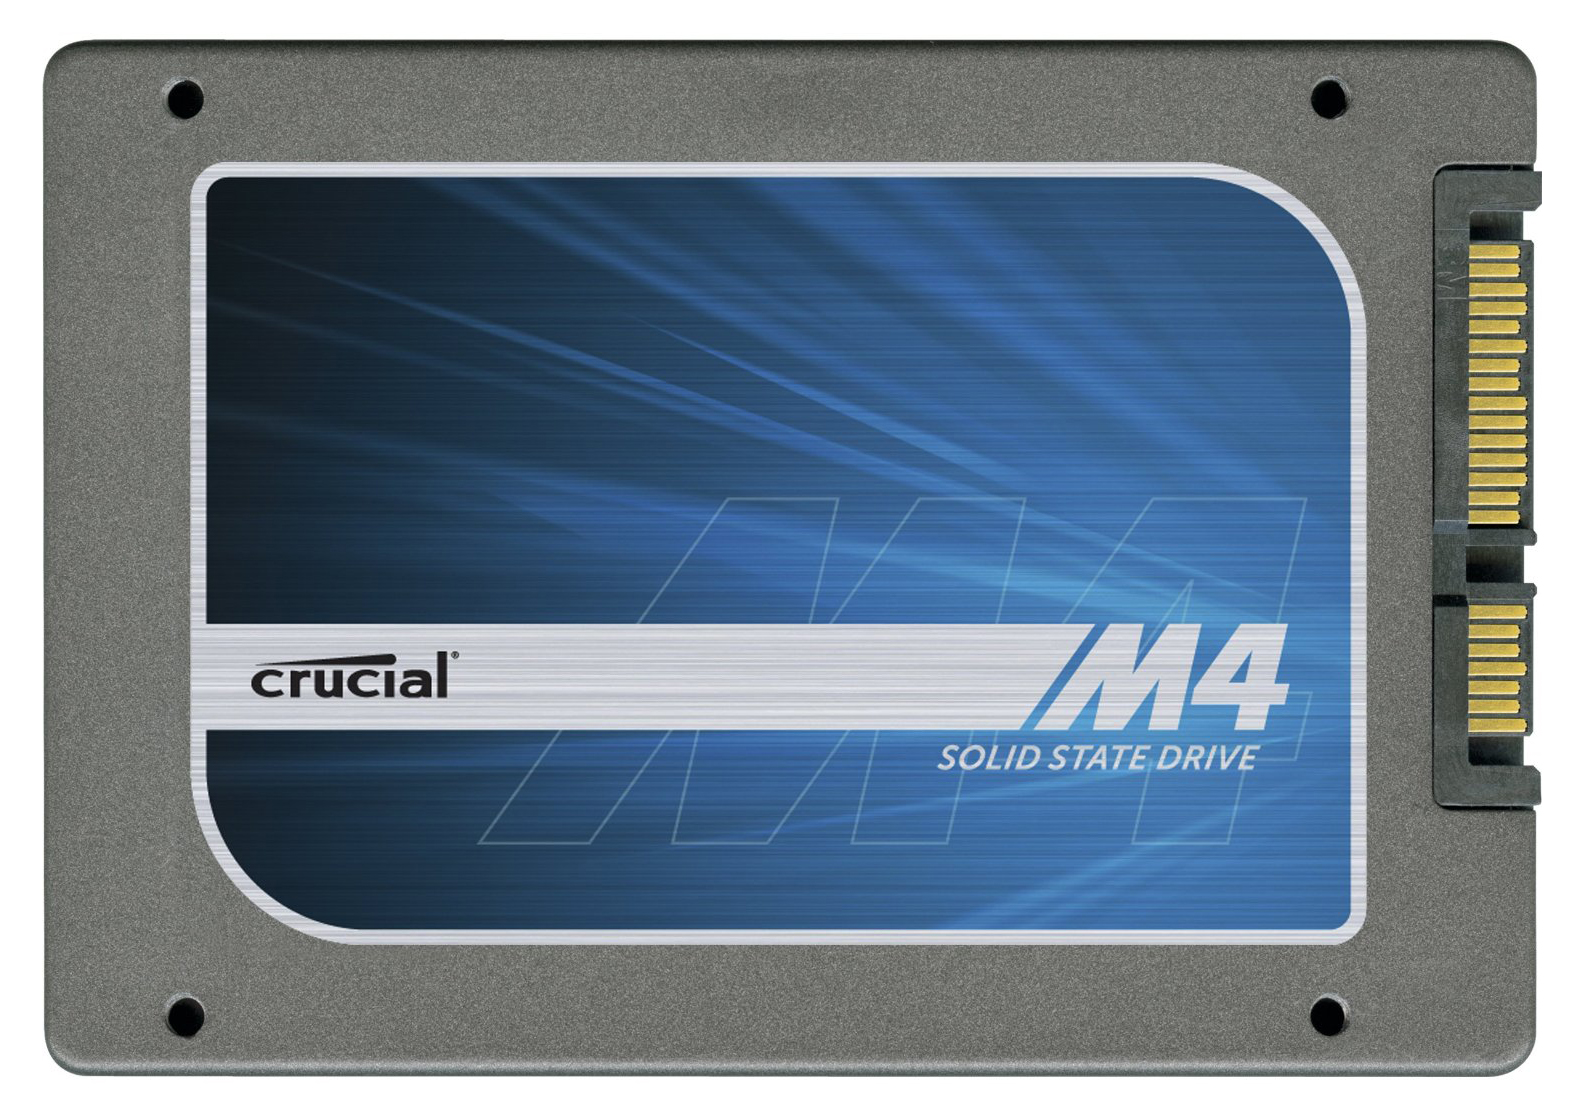 CT256M4SSD1CCA Crucial M4 Series 256GB MLC SATA 6Gbps 2.5-inch Internal Solid State Drive (SSD) with Data Transfer Kit